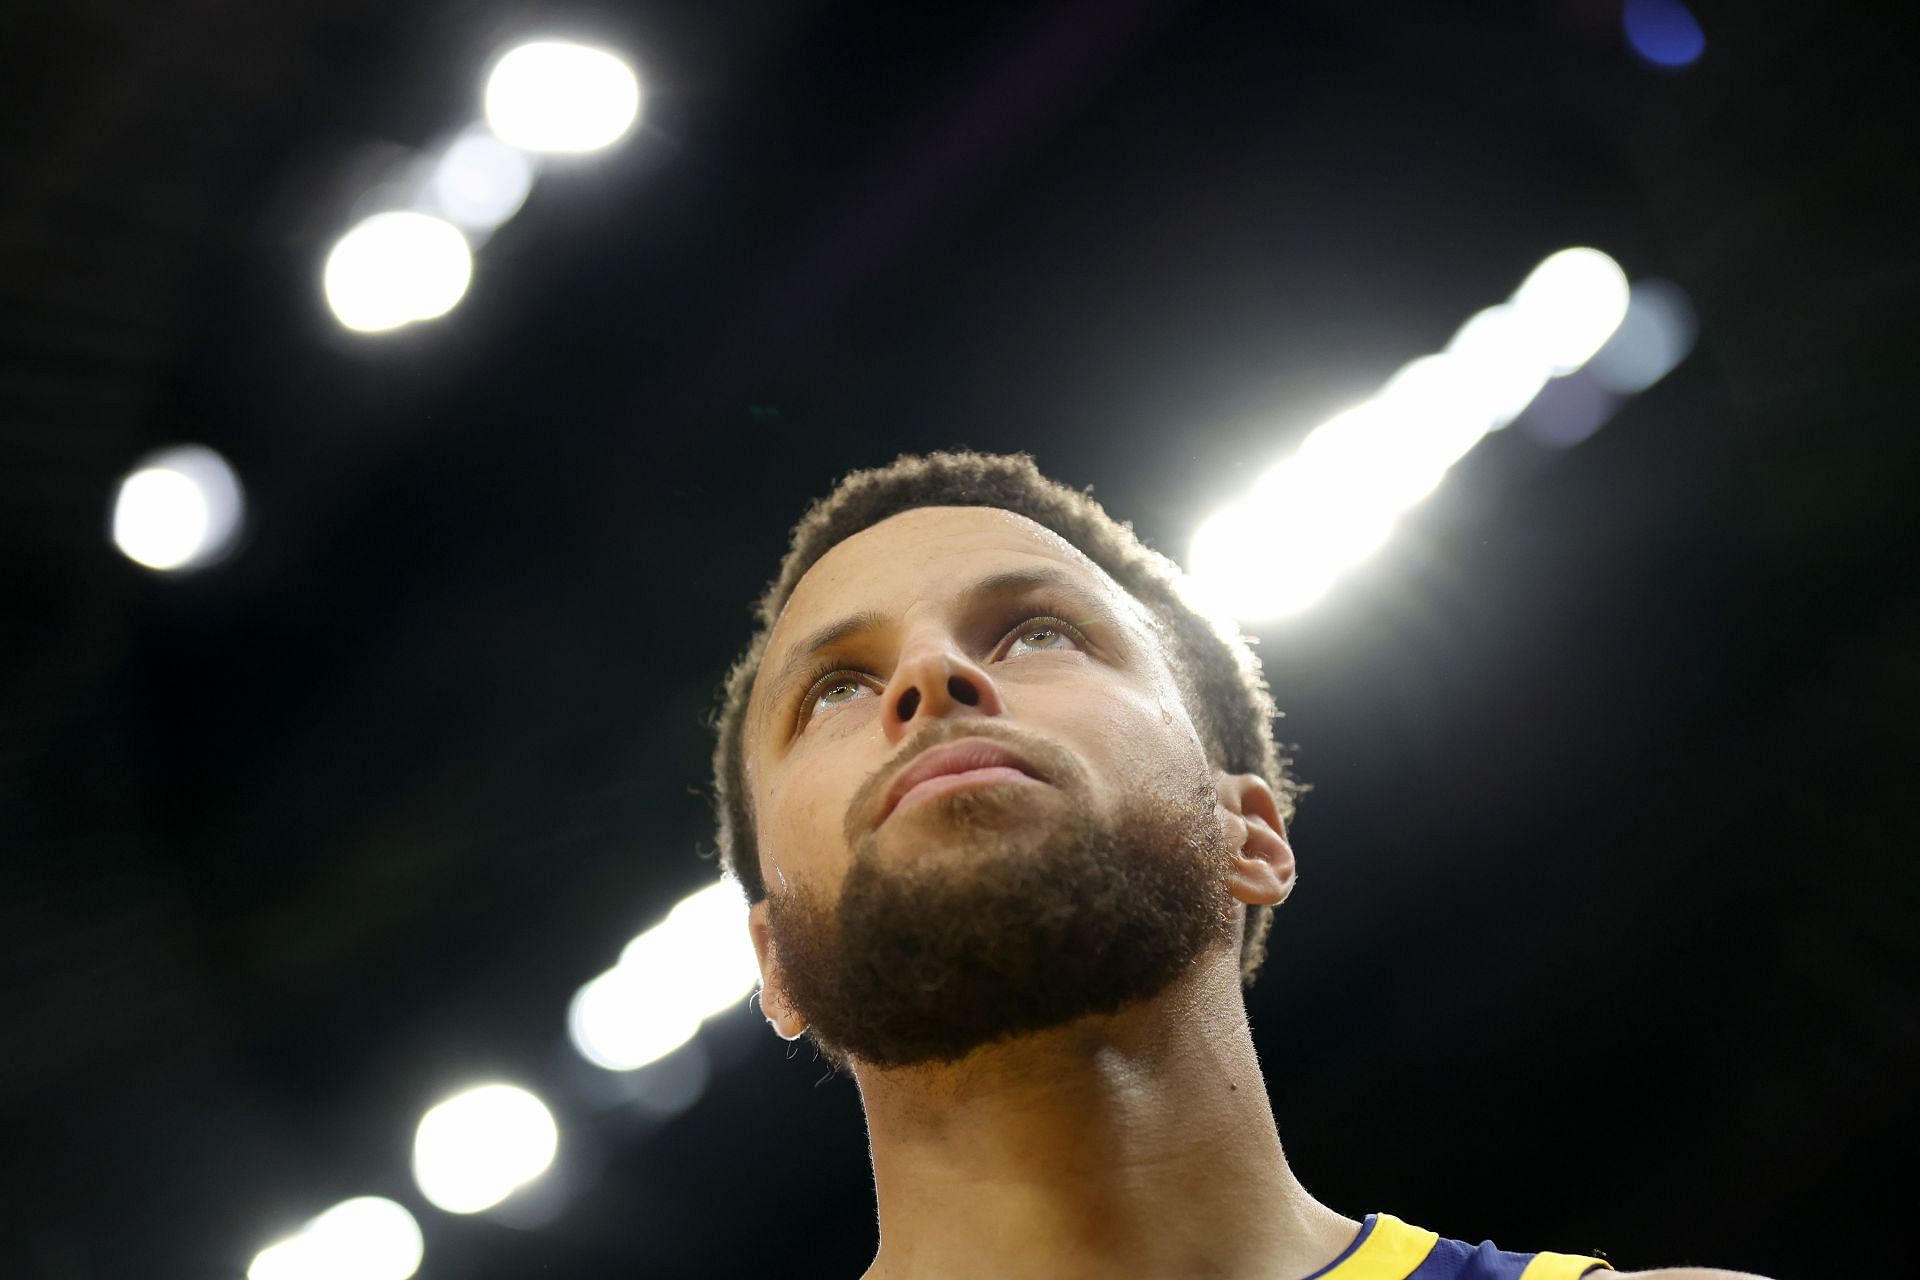 Stephen Curry's historic night: ASG MVP by destroying the record